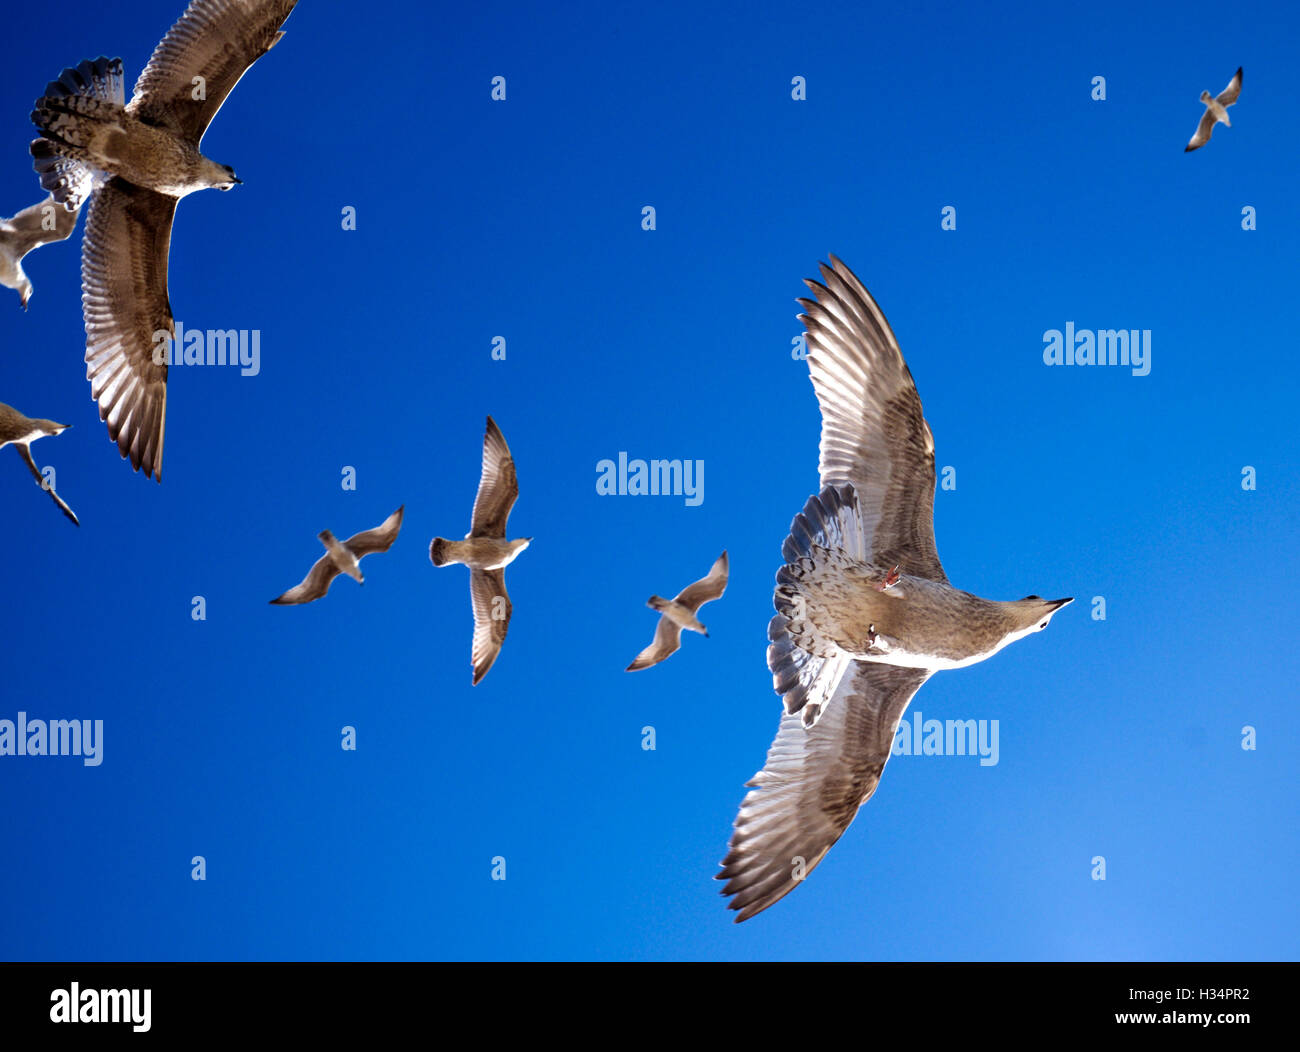 seagulls flying directly overhead in a line, beautiful marking on the seagulls against a striking blue sky, beautiful wildlife. Stock Photo